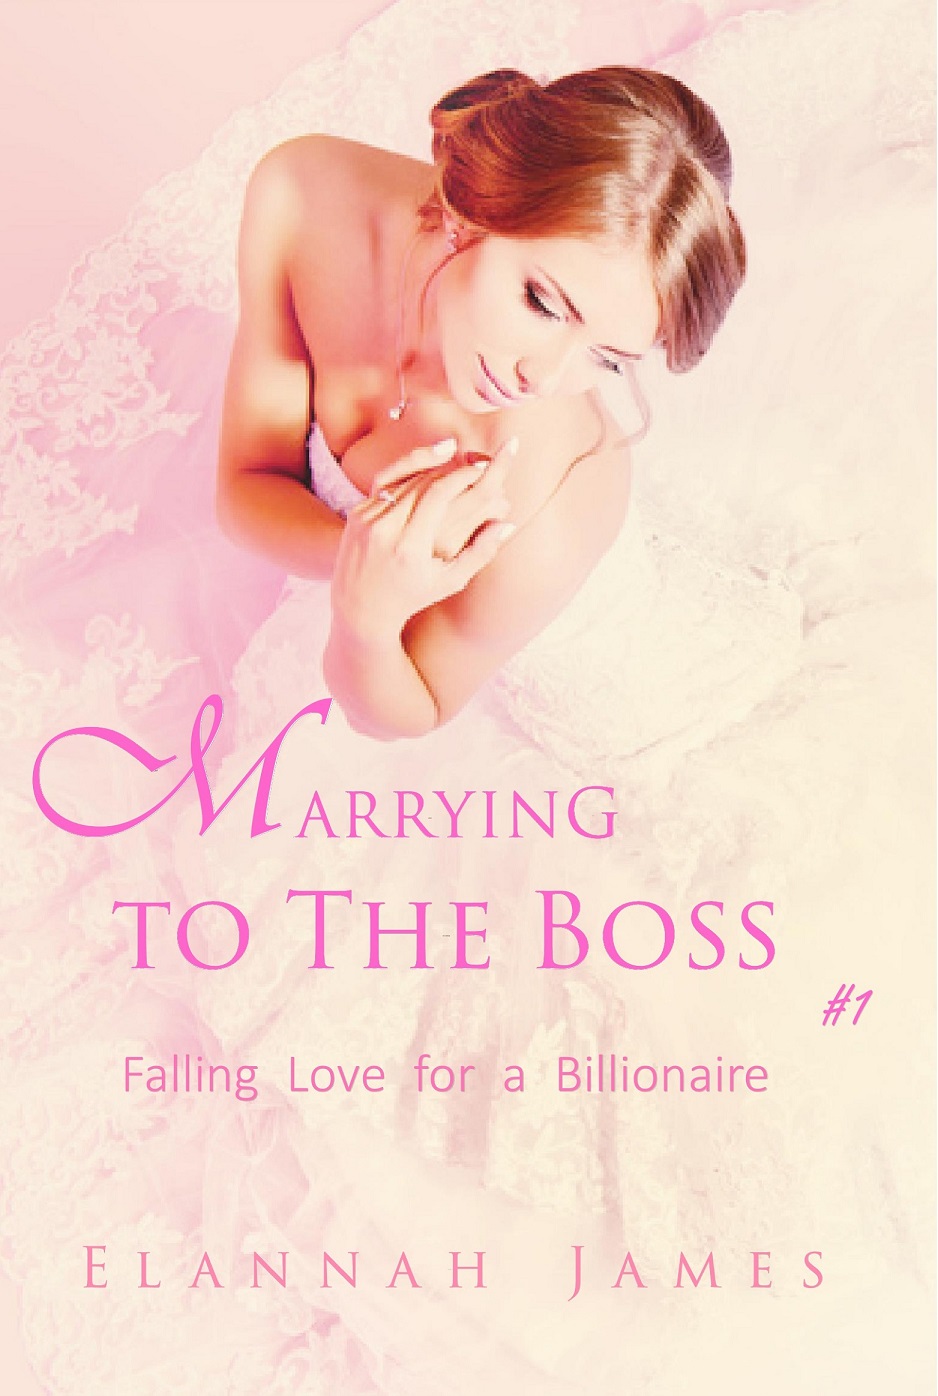 Marrying to The Boss: Falling Love for a Billionaire #1 by Elannah James